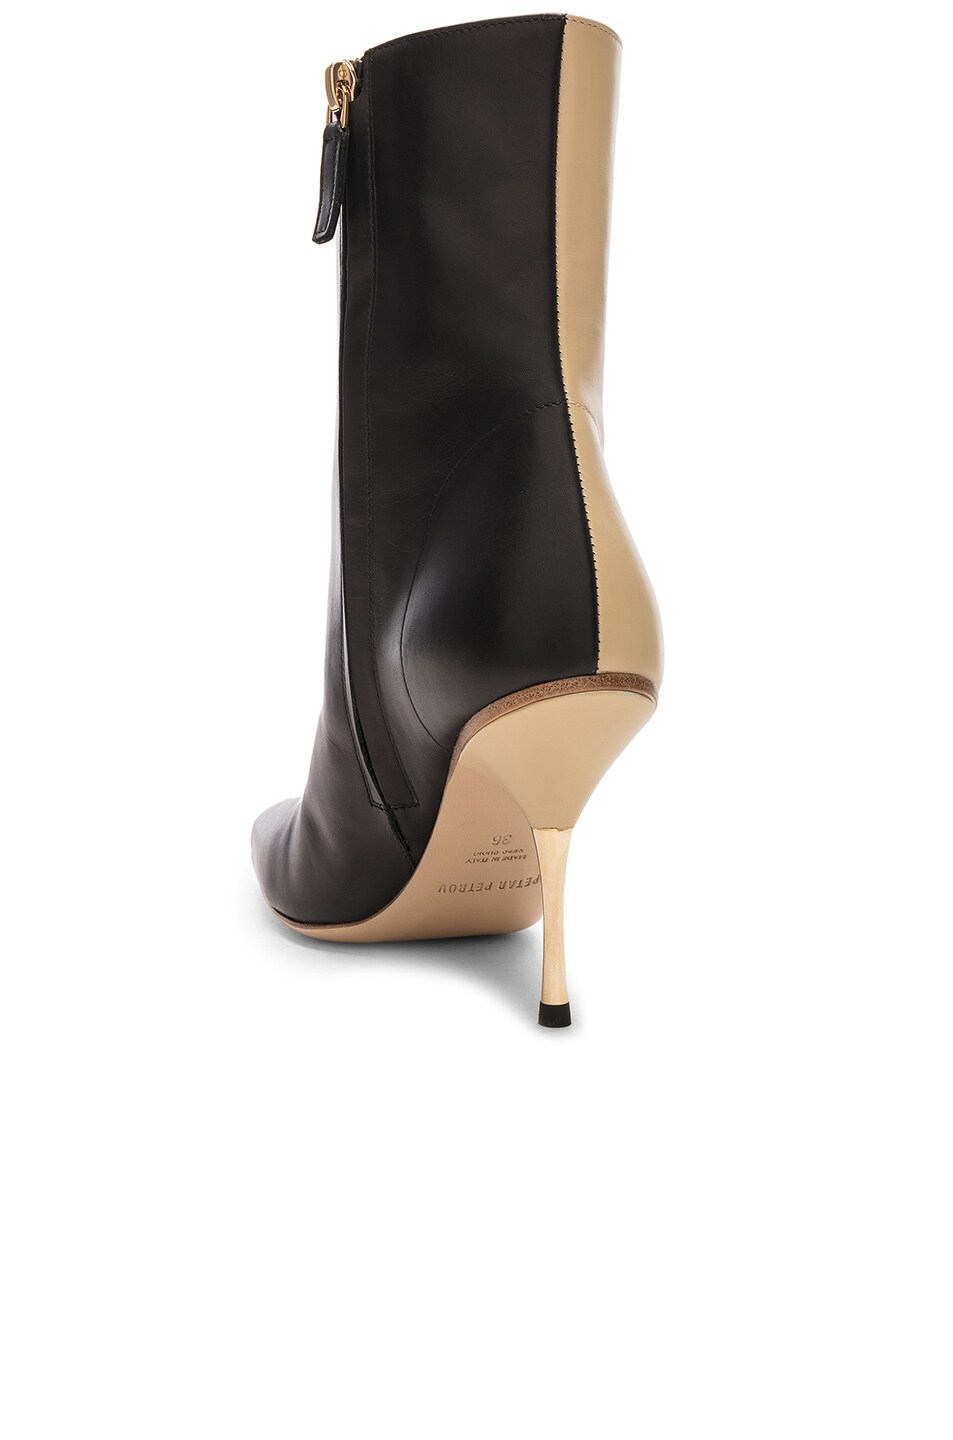 Petar Petrov Leather Svea Ankle Boots in Black, Beige & Gold | FWRD